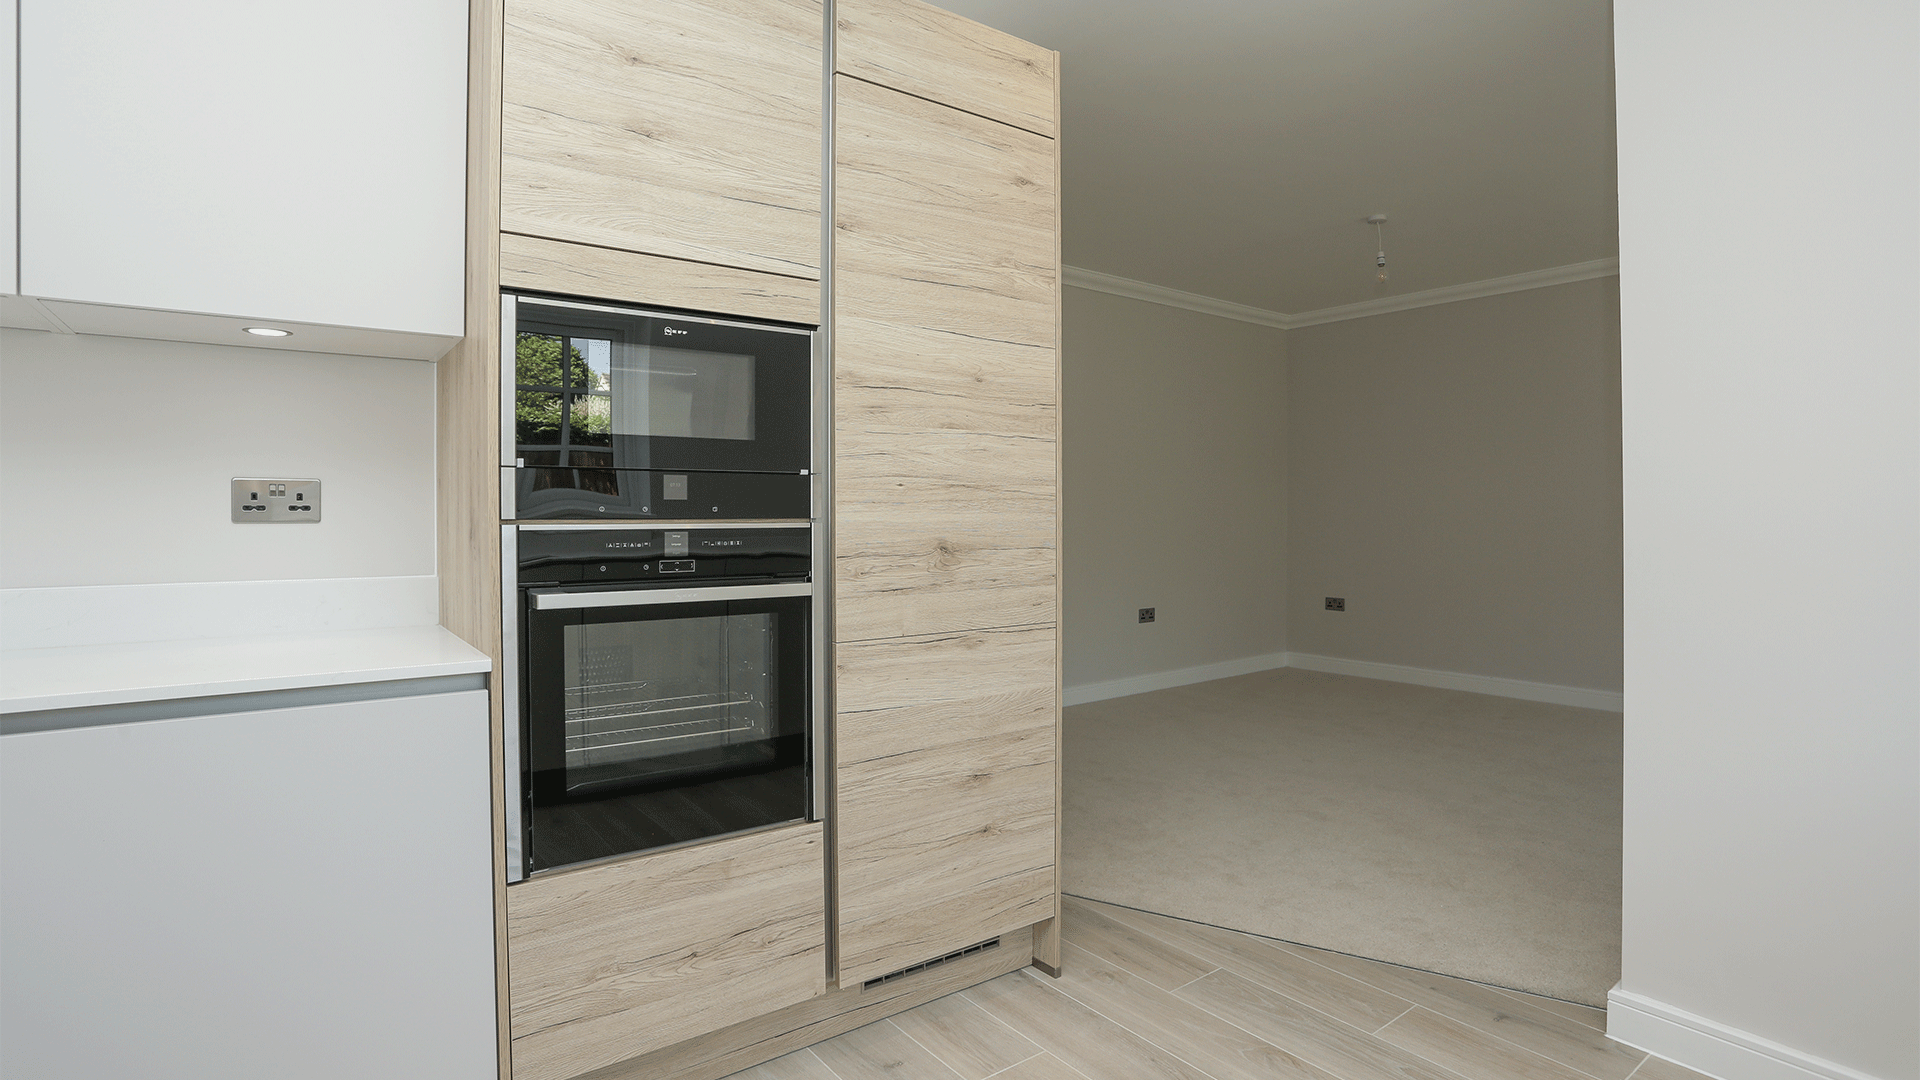 Wood effect wardrobes with integrated Neff oven appliance at Miller's Meadow plot 10 kitchen